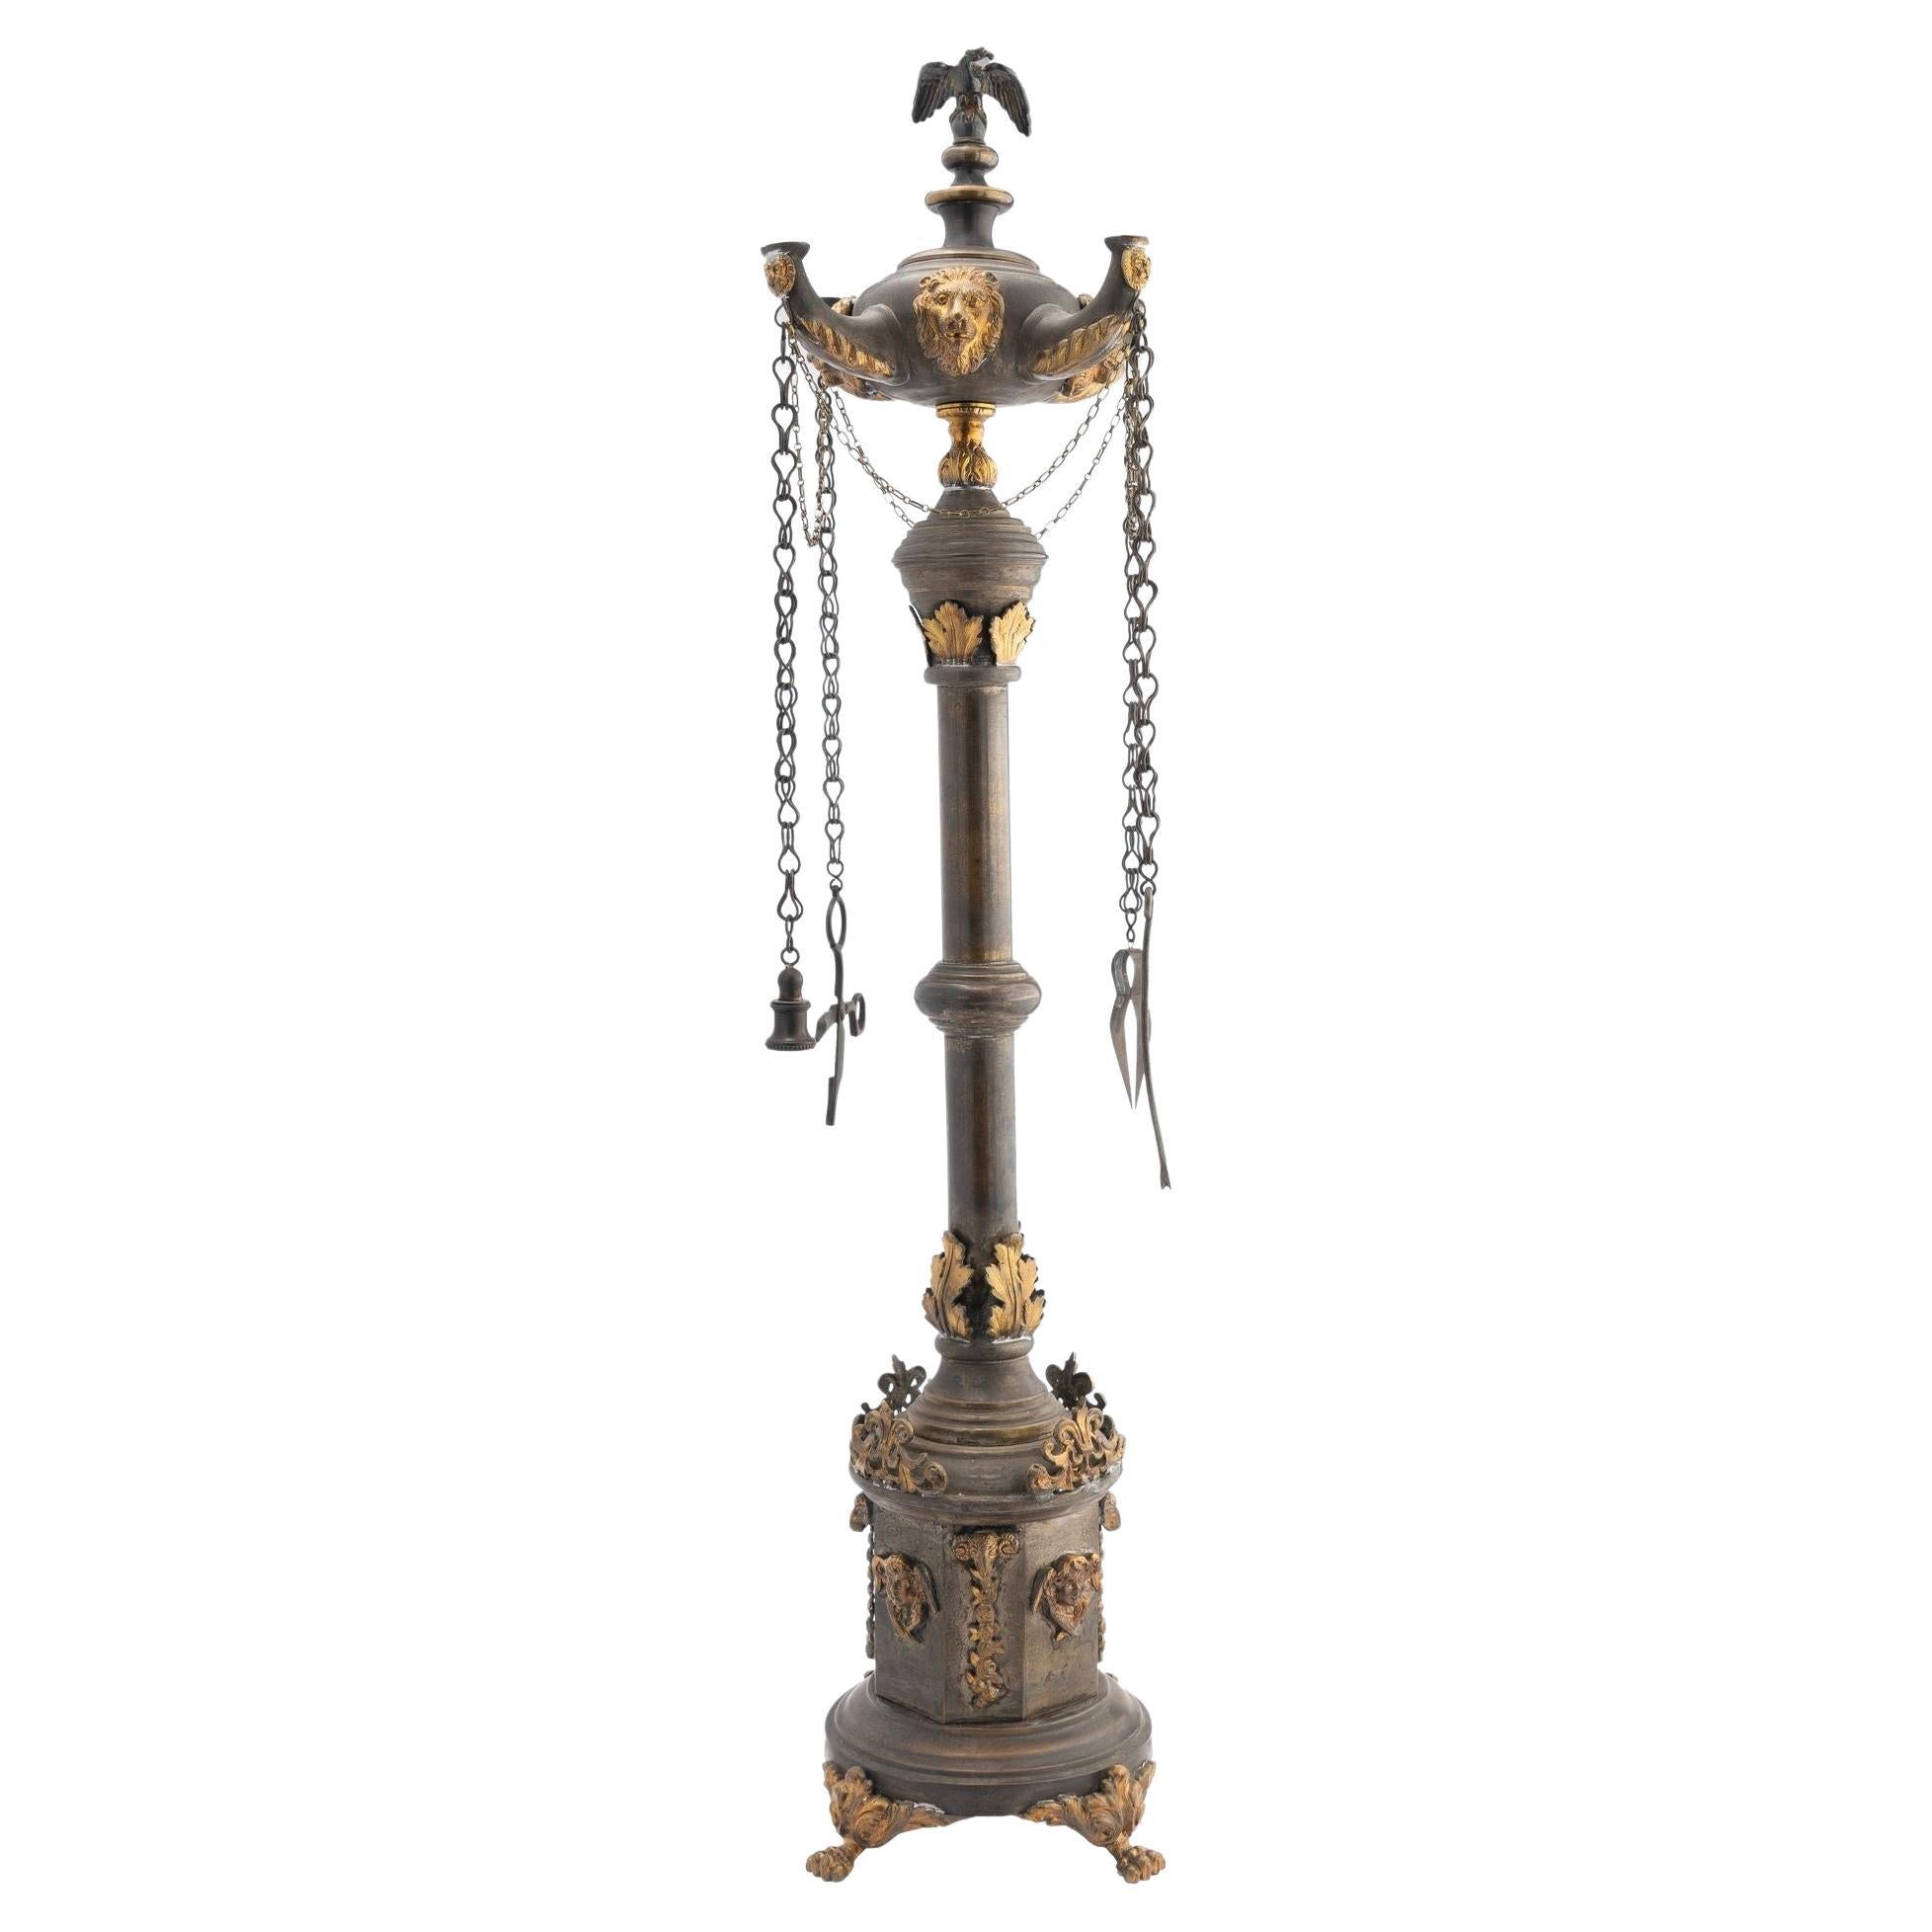 Italian Brass Lucerne Oil Lamp with Contrasting Gilt Embellishments '1800' For Sale